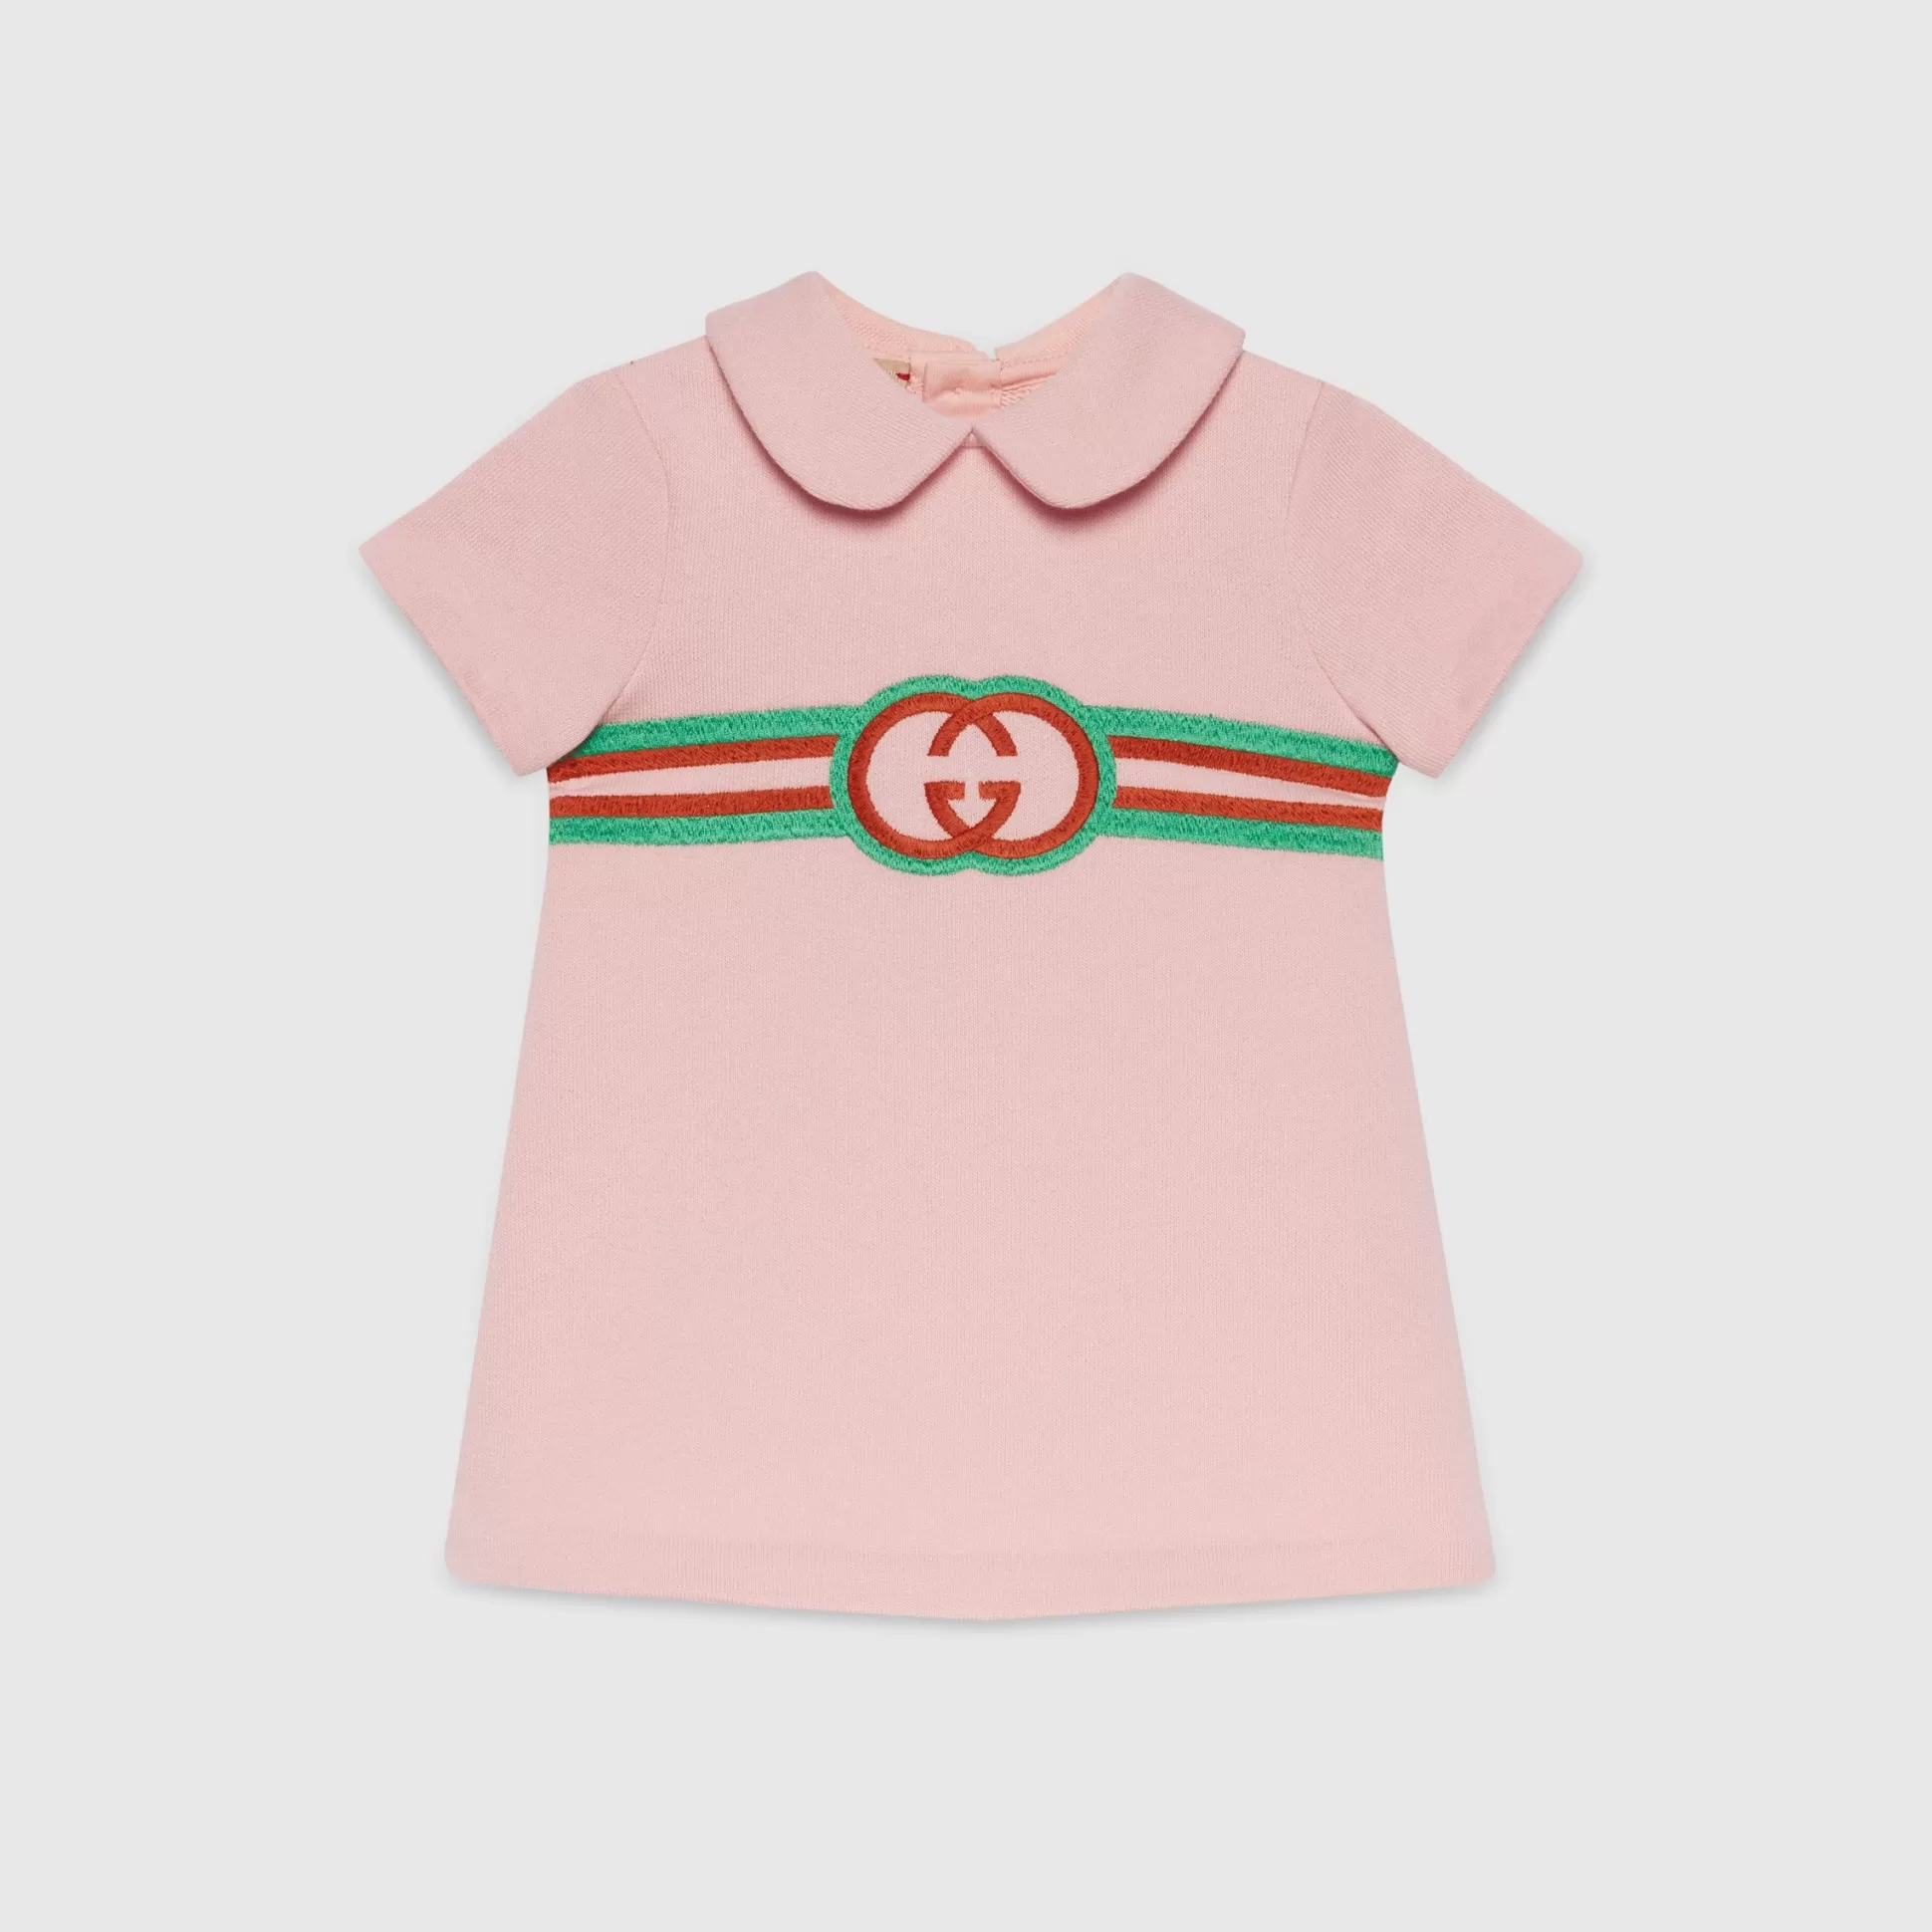 GUCCI Baby Cotton Jersey Dress With Embroidery-Children Girls (0-36 Months)